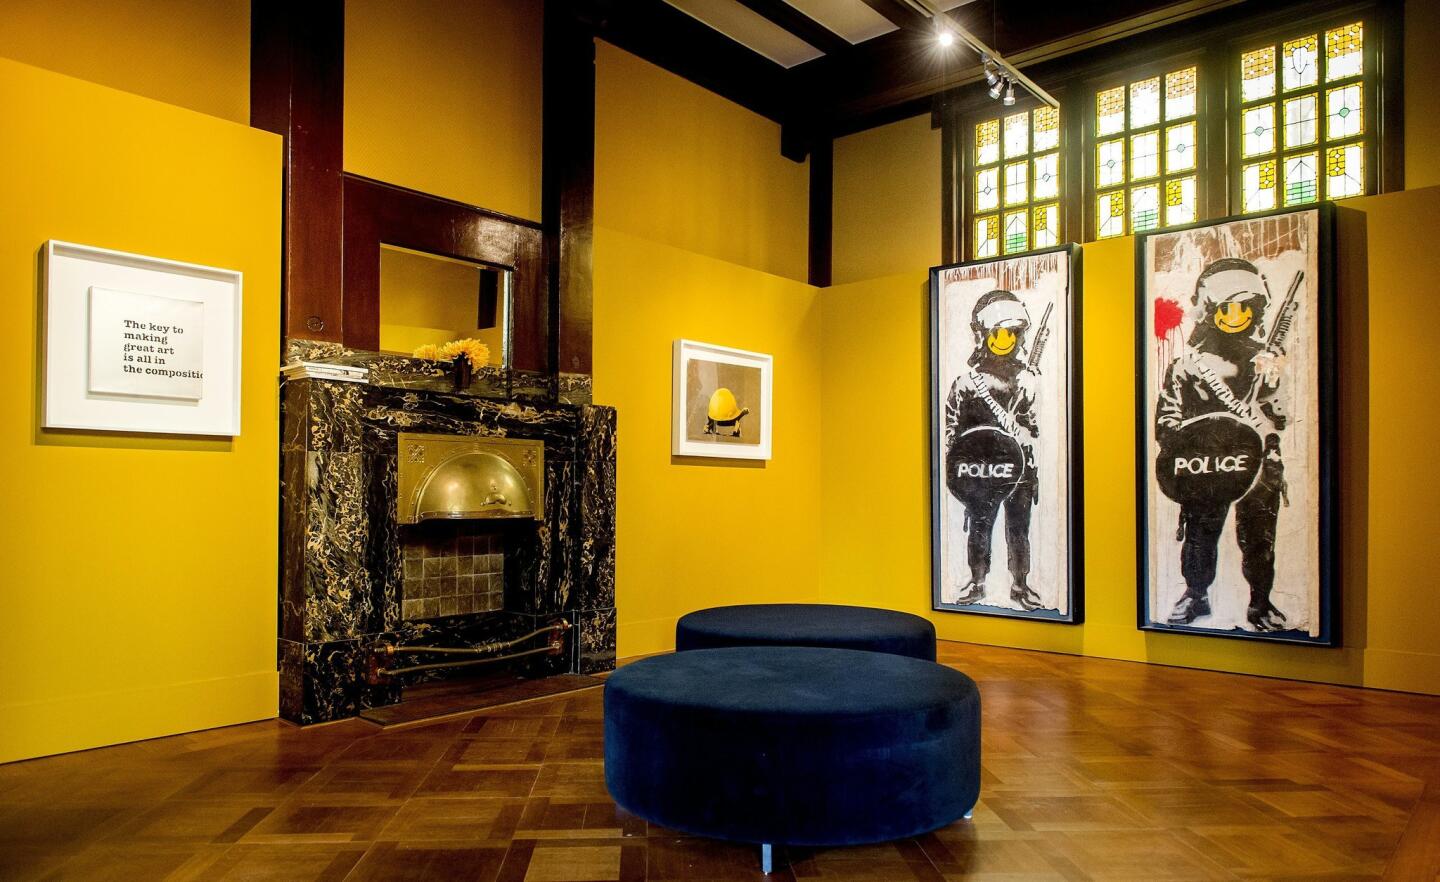 Work of the artists Banksy and Andy Warhol are displayed at the Modern Contemporary Museum (MoCo), a new private museum, at the Museumplein in Amsterdam.